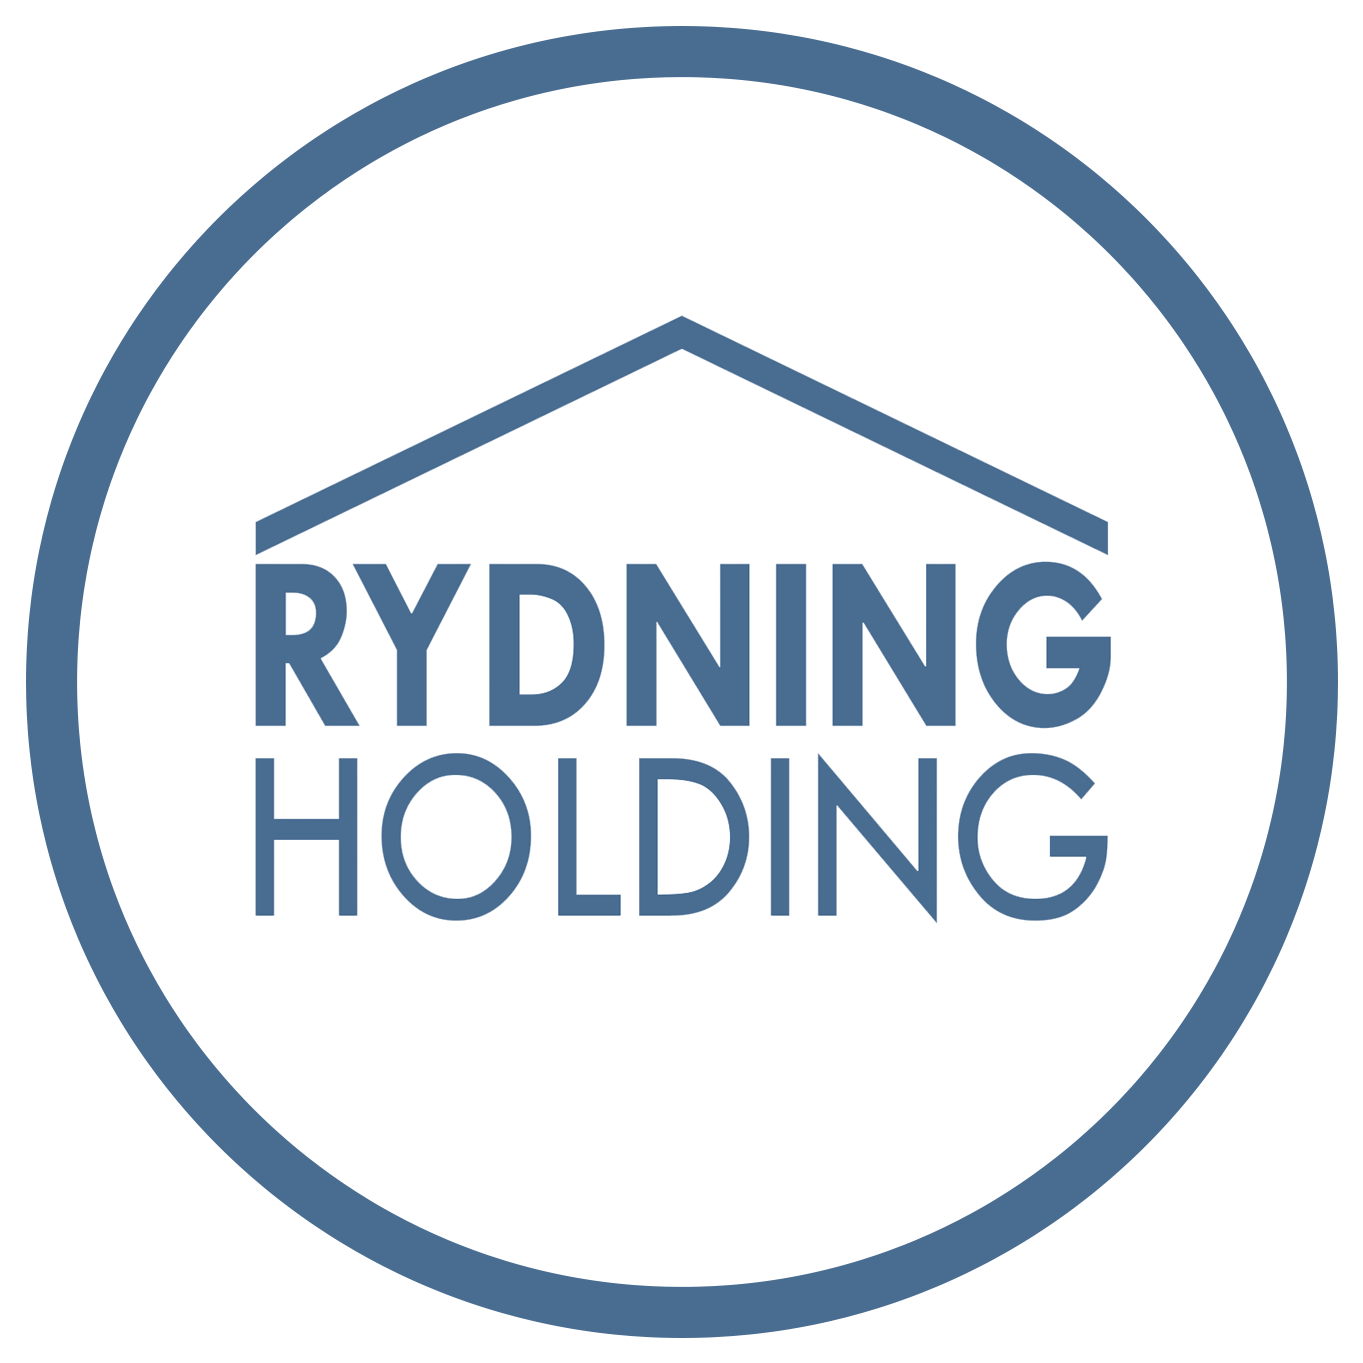 RYDNING HOLDING AS